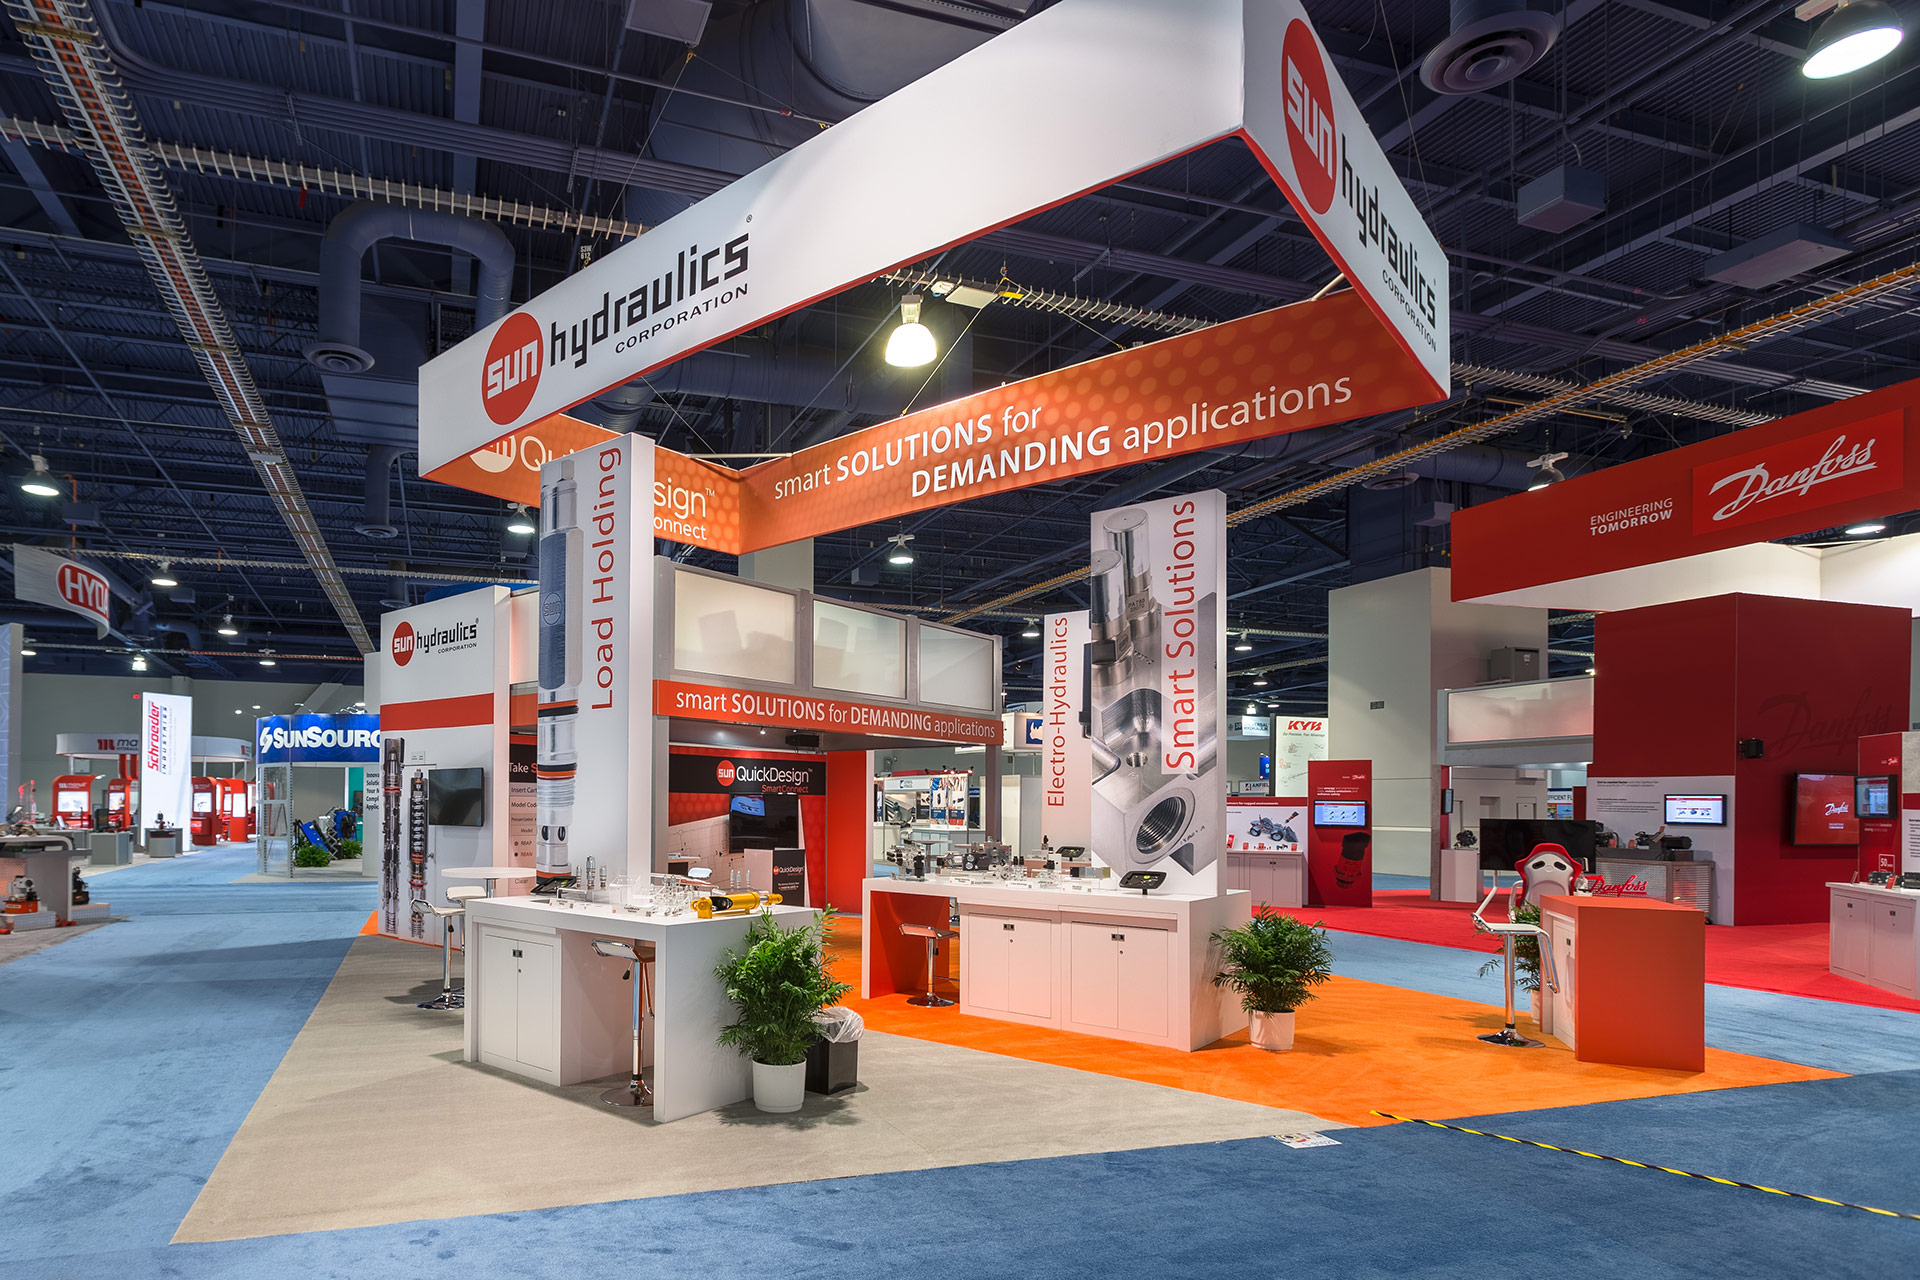 Trade show exhibit with an orange and white color scheme, a suspended rectangular banner with four faces above and multiple product displays within and a two-story platform in the background. Convention center has blue carpet and other exhibits are visible.